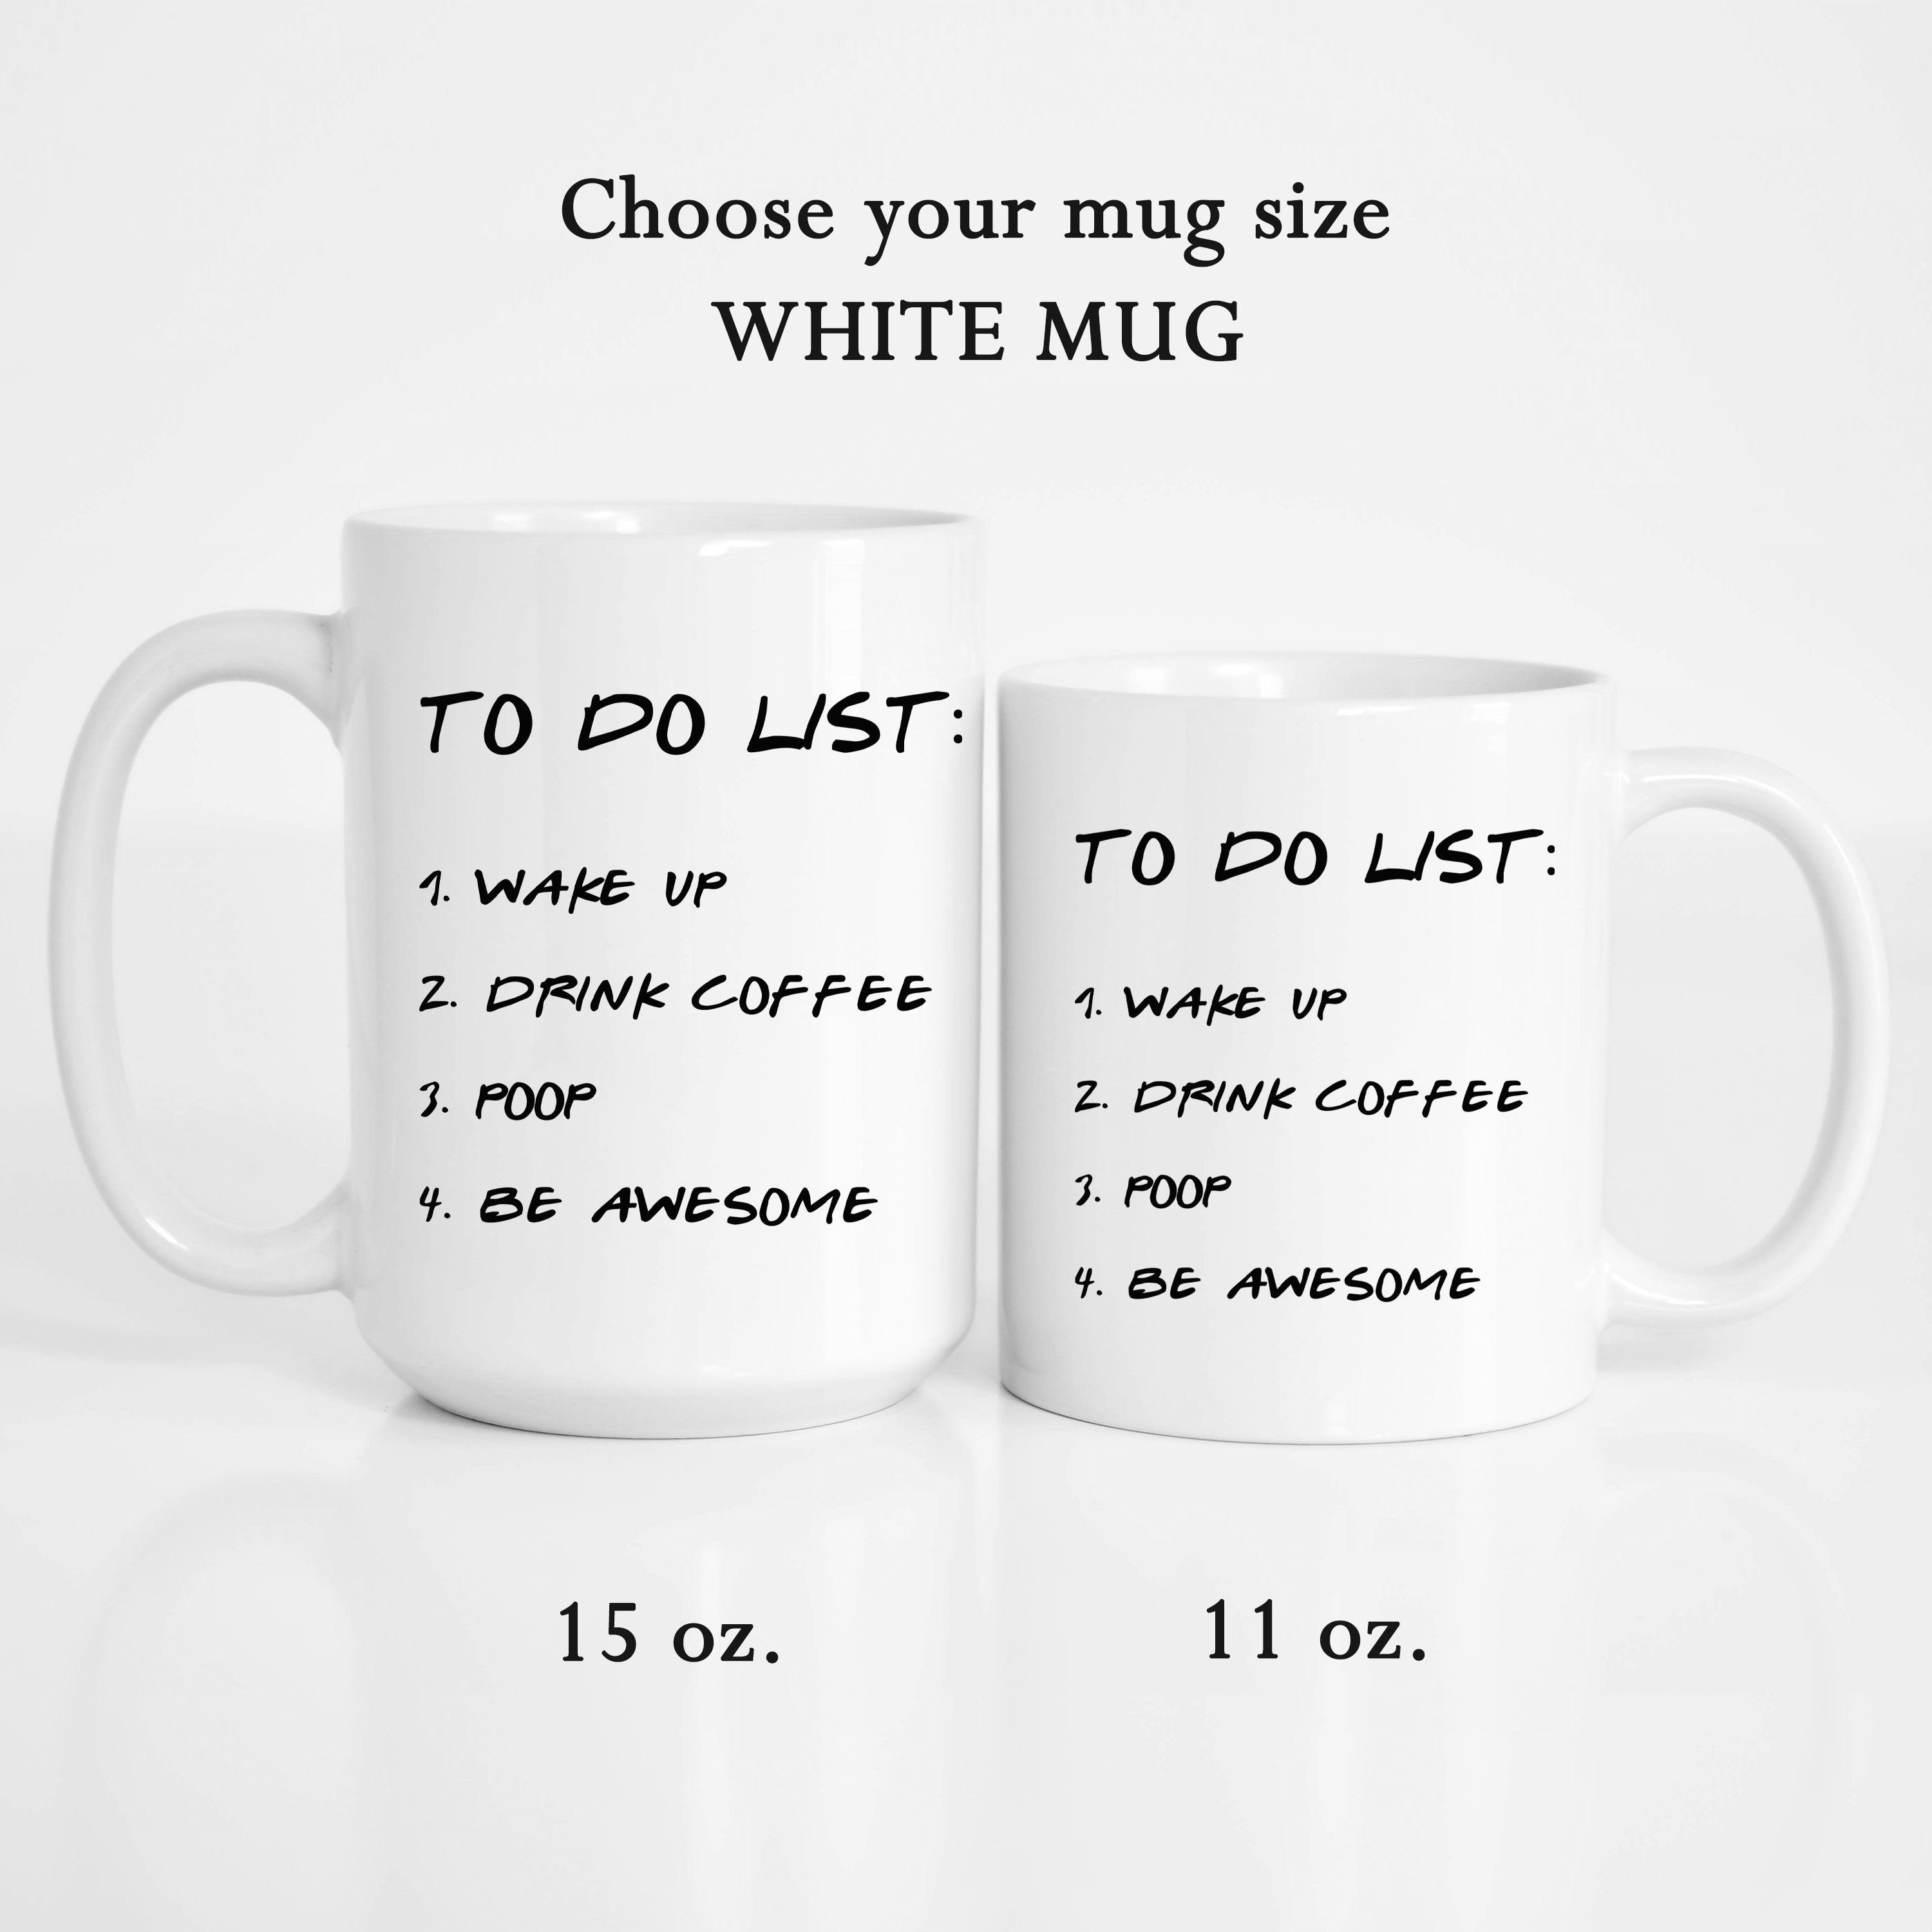 To Do List Quotes Printed Coffee Mug, funny man gift – The Artsy Spot